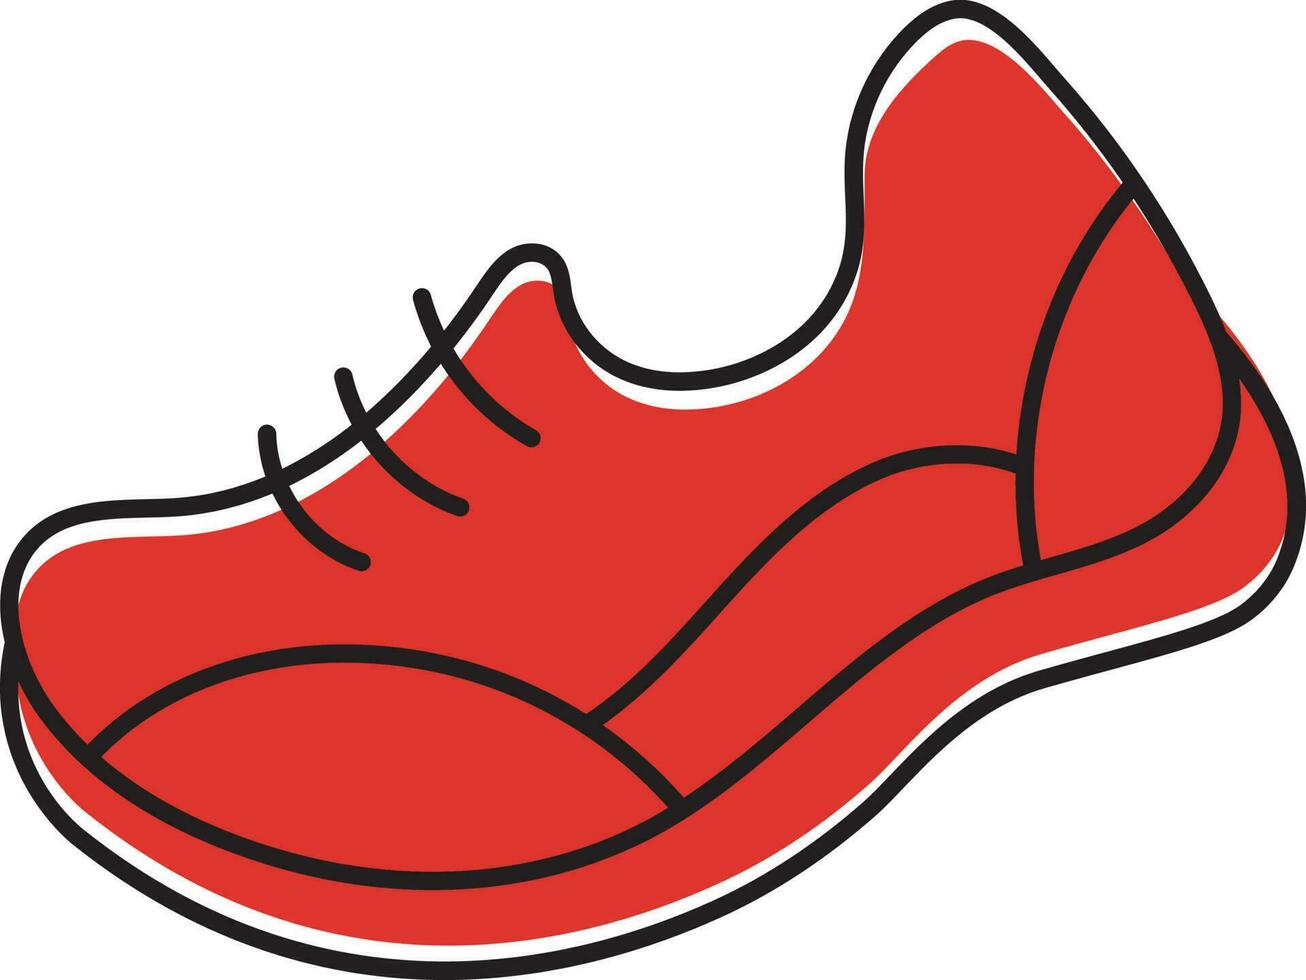 Isolated Sports Shoes Icon In Red Color. vector